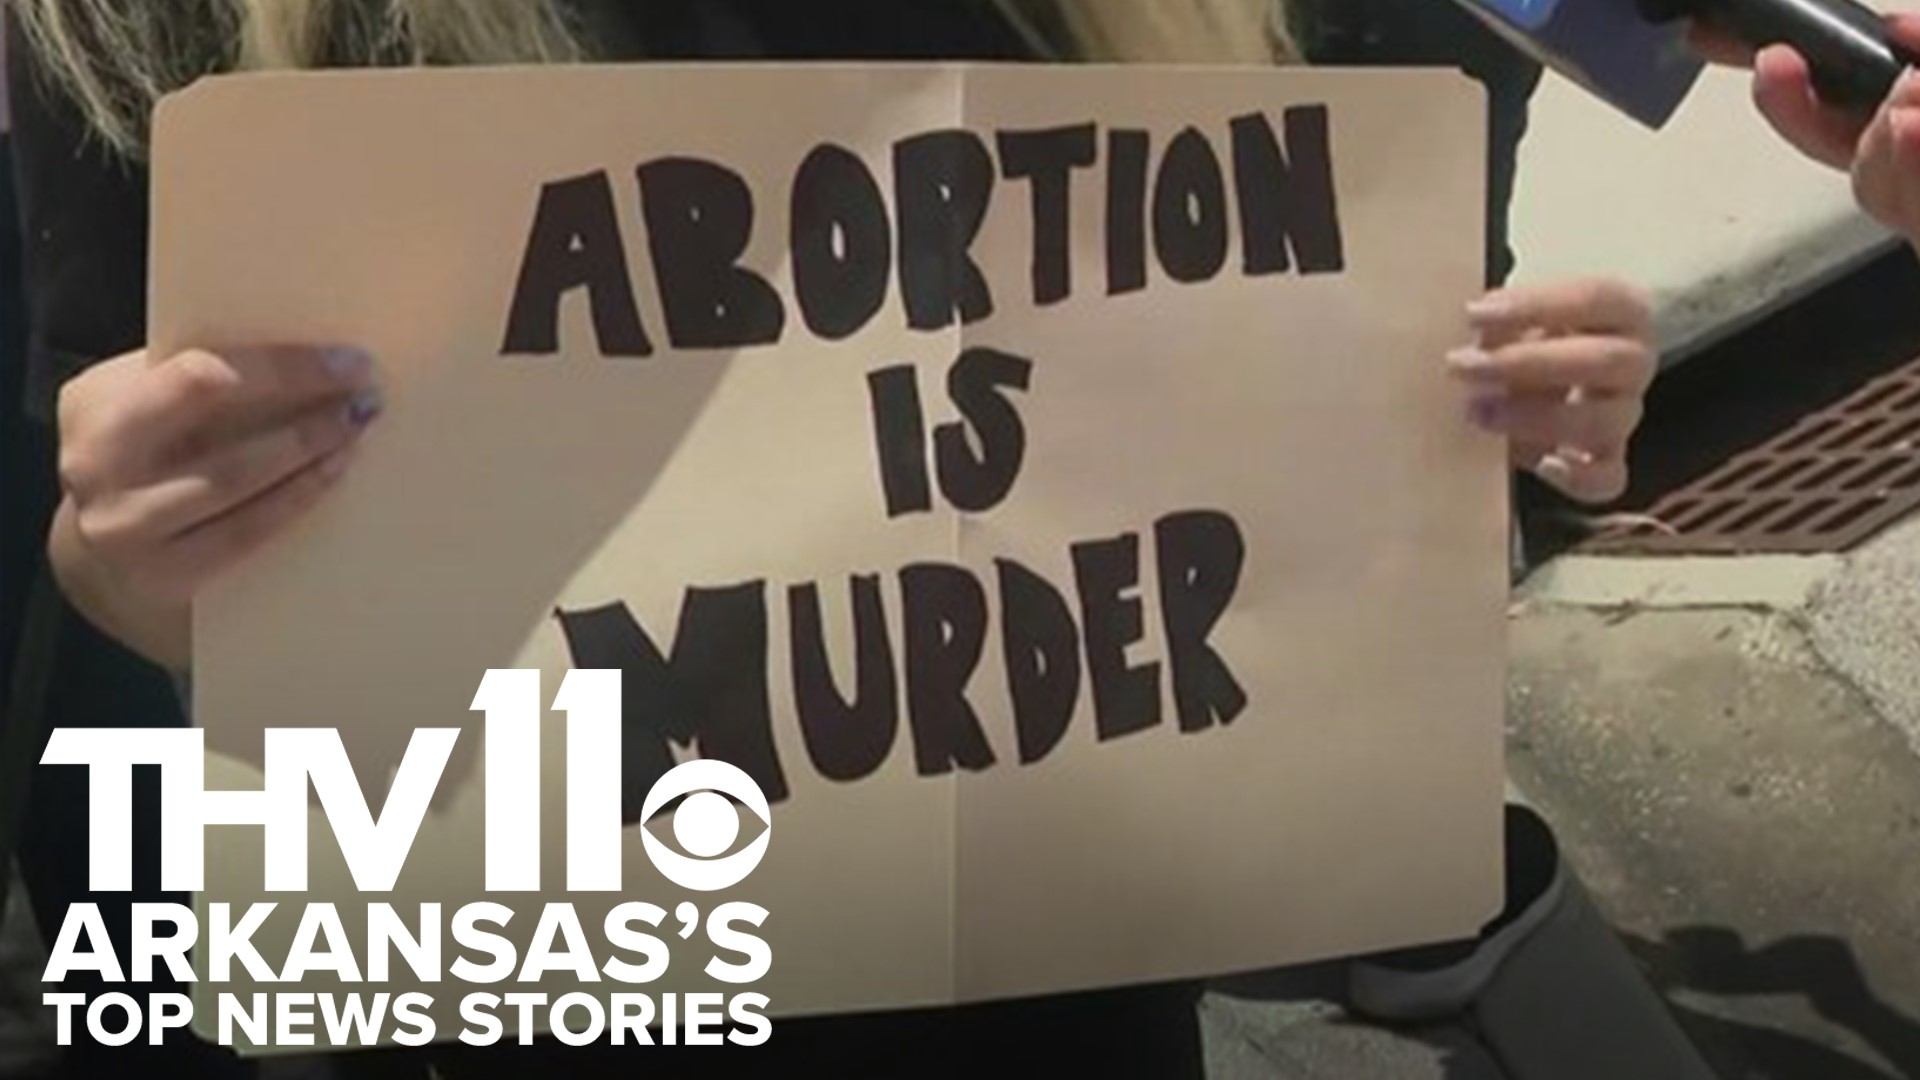 Sarah Horbacewicz reports on the top news stories in Arkansas, including the leaked Supreme Court draft showing the overturning of Roe vs. Wade.